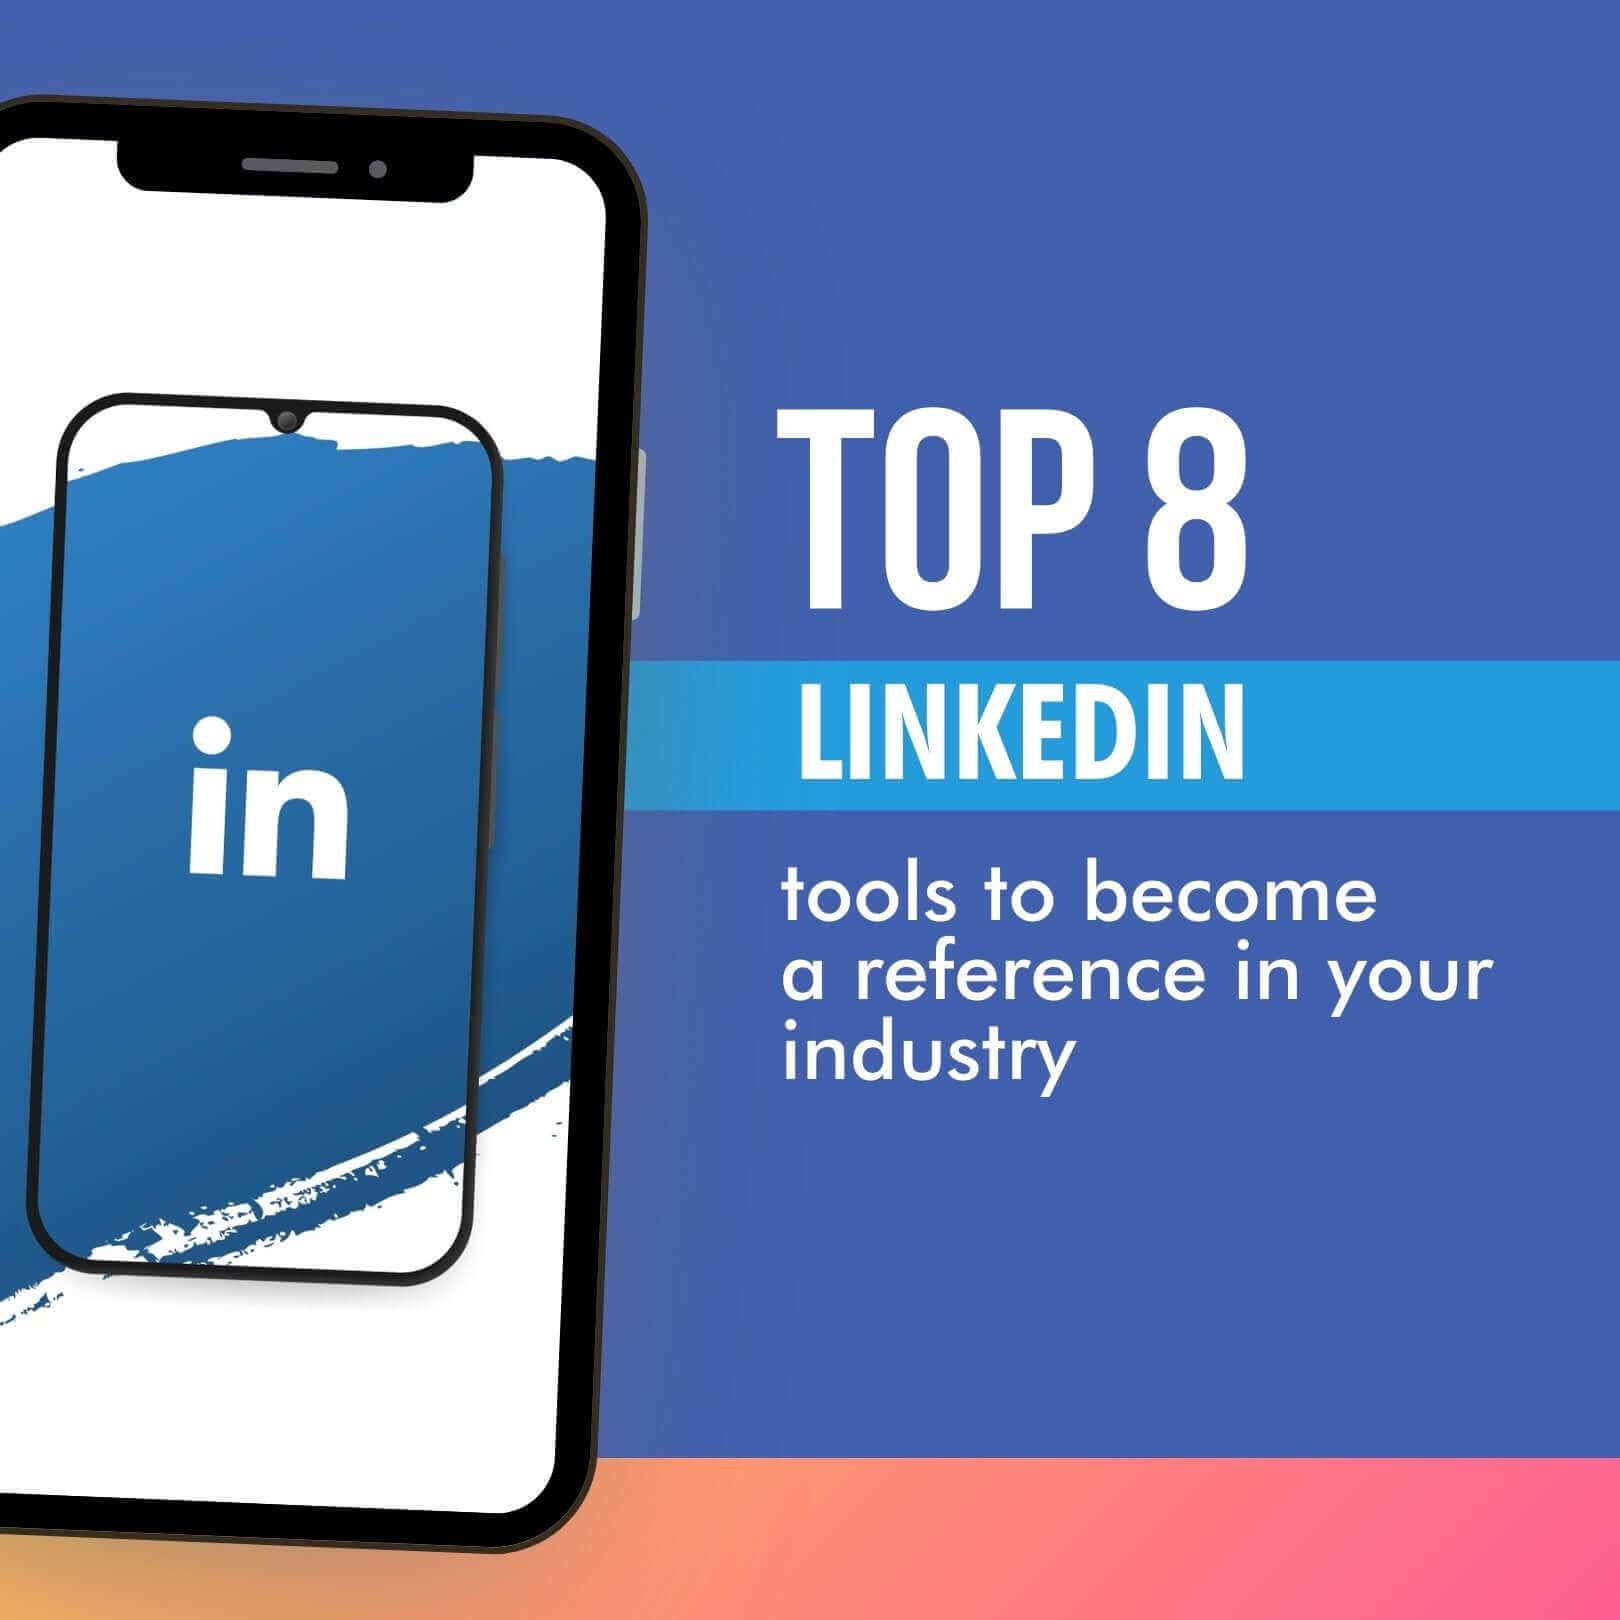 Top 8 LinkedIn tools to become a reference in your industry